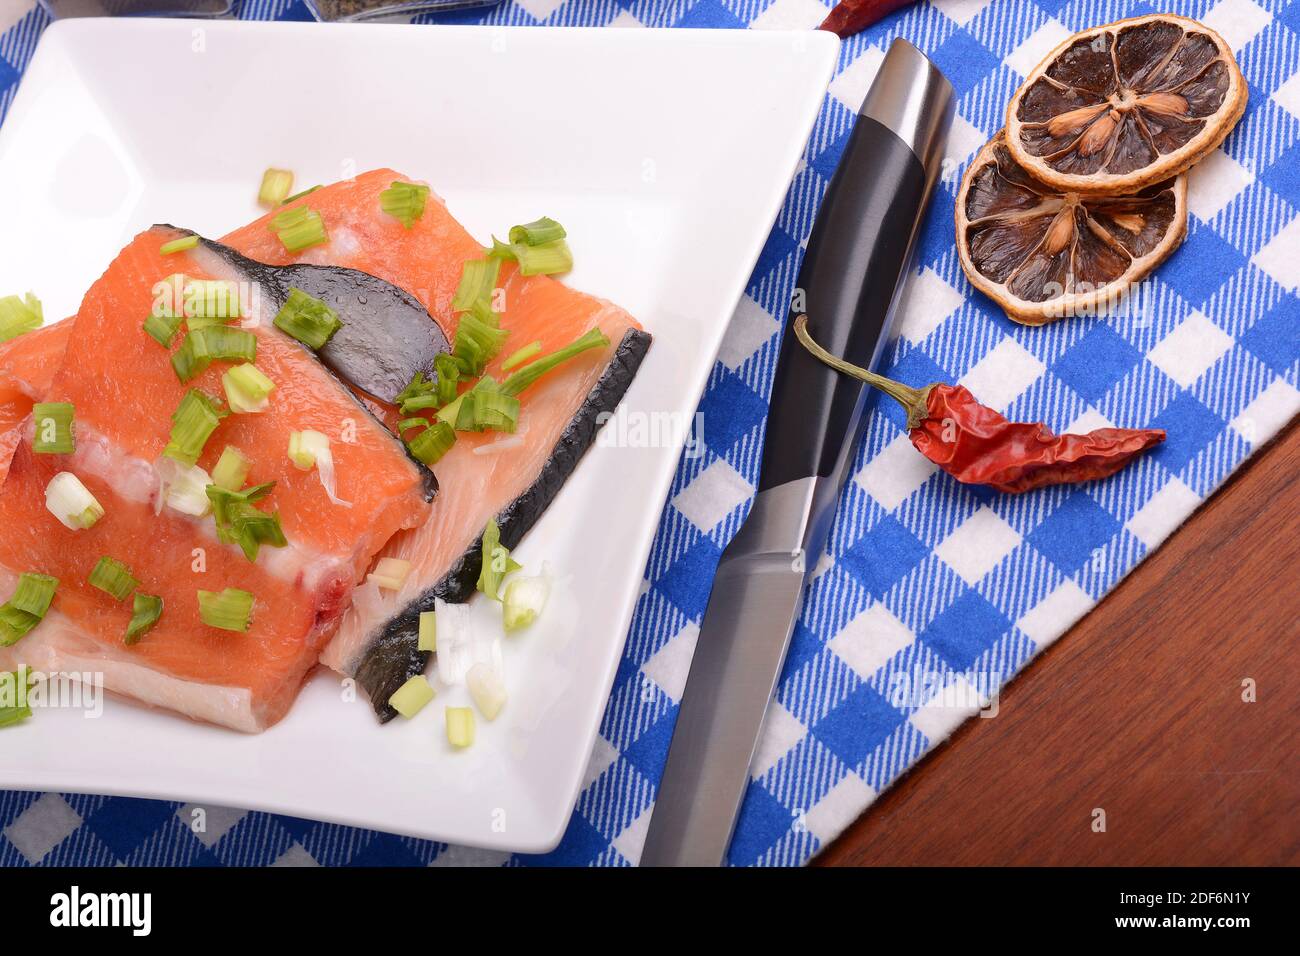 Food concept: red salmon fish, lemon and cabbage with red hot chilli pepper with greens. Healthy food cooking. Stock Photo